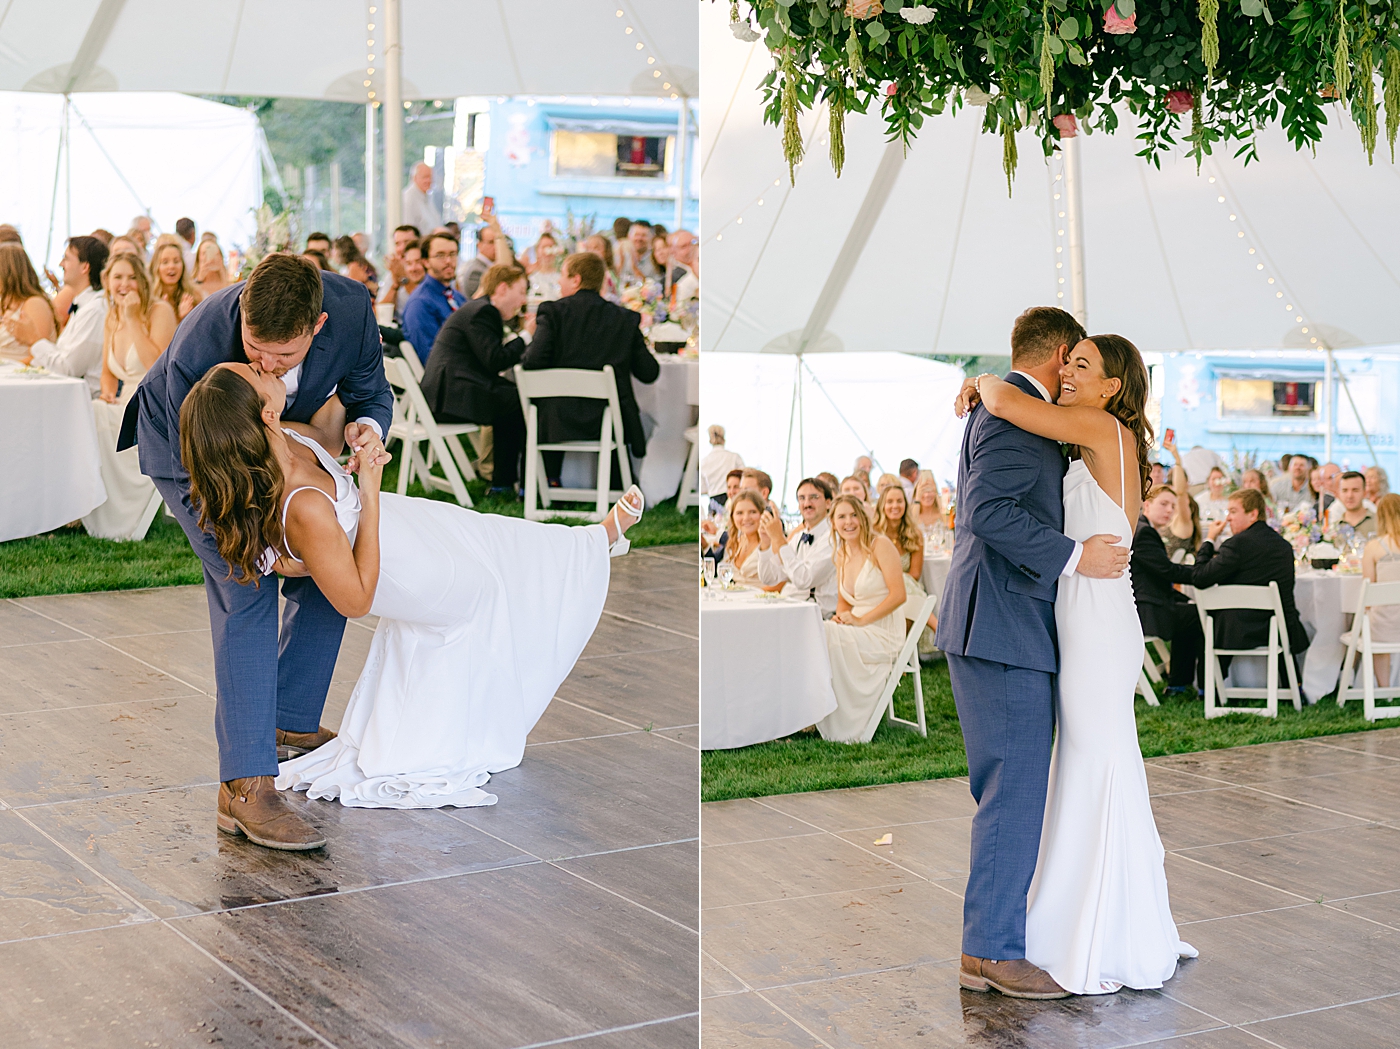 Bride and groom first dance during wedding reception | Image by Hope Helmuth Photography